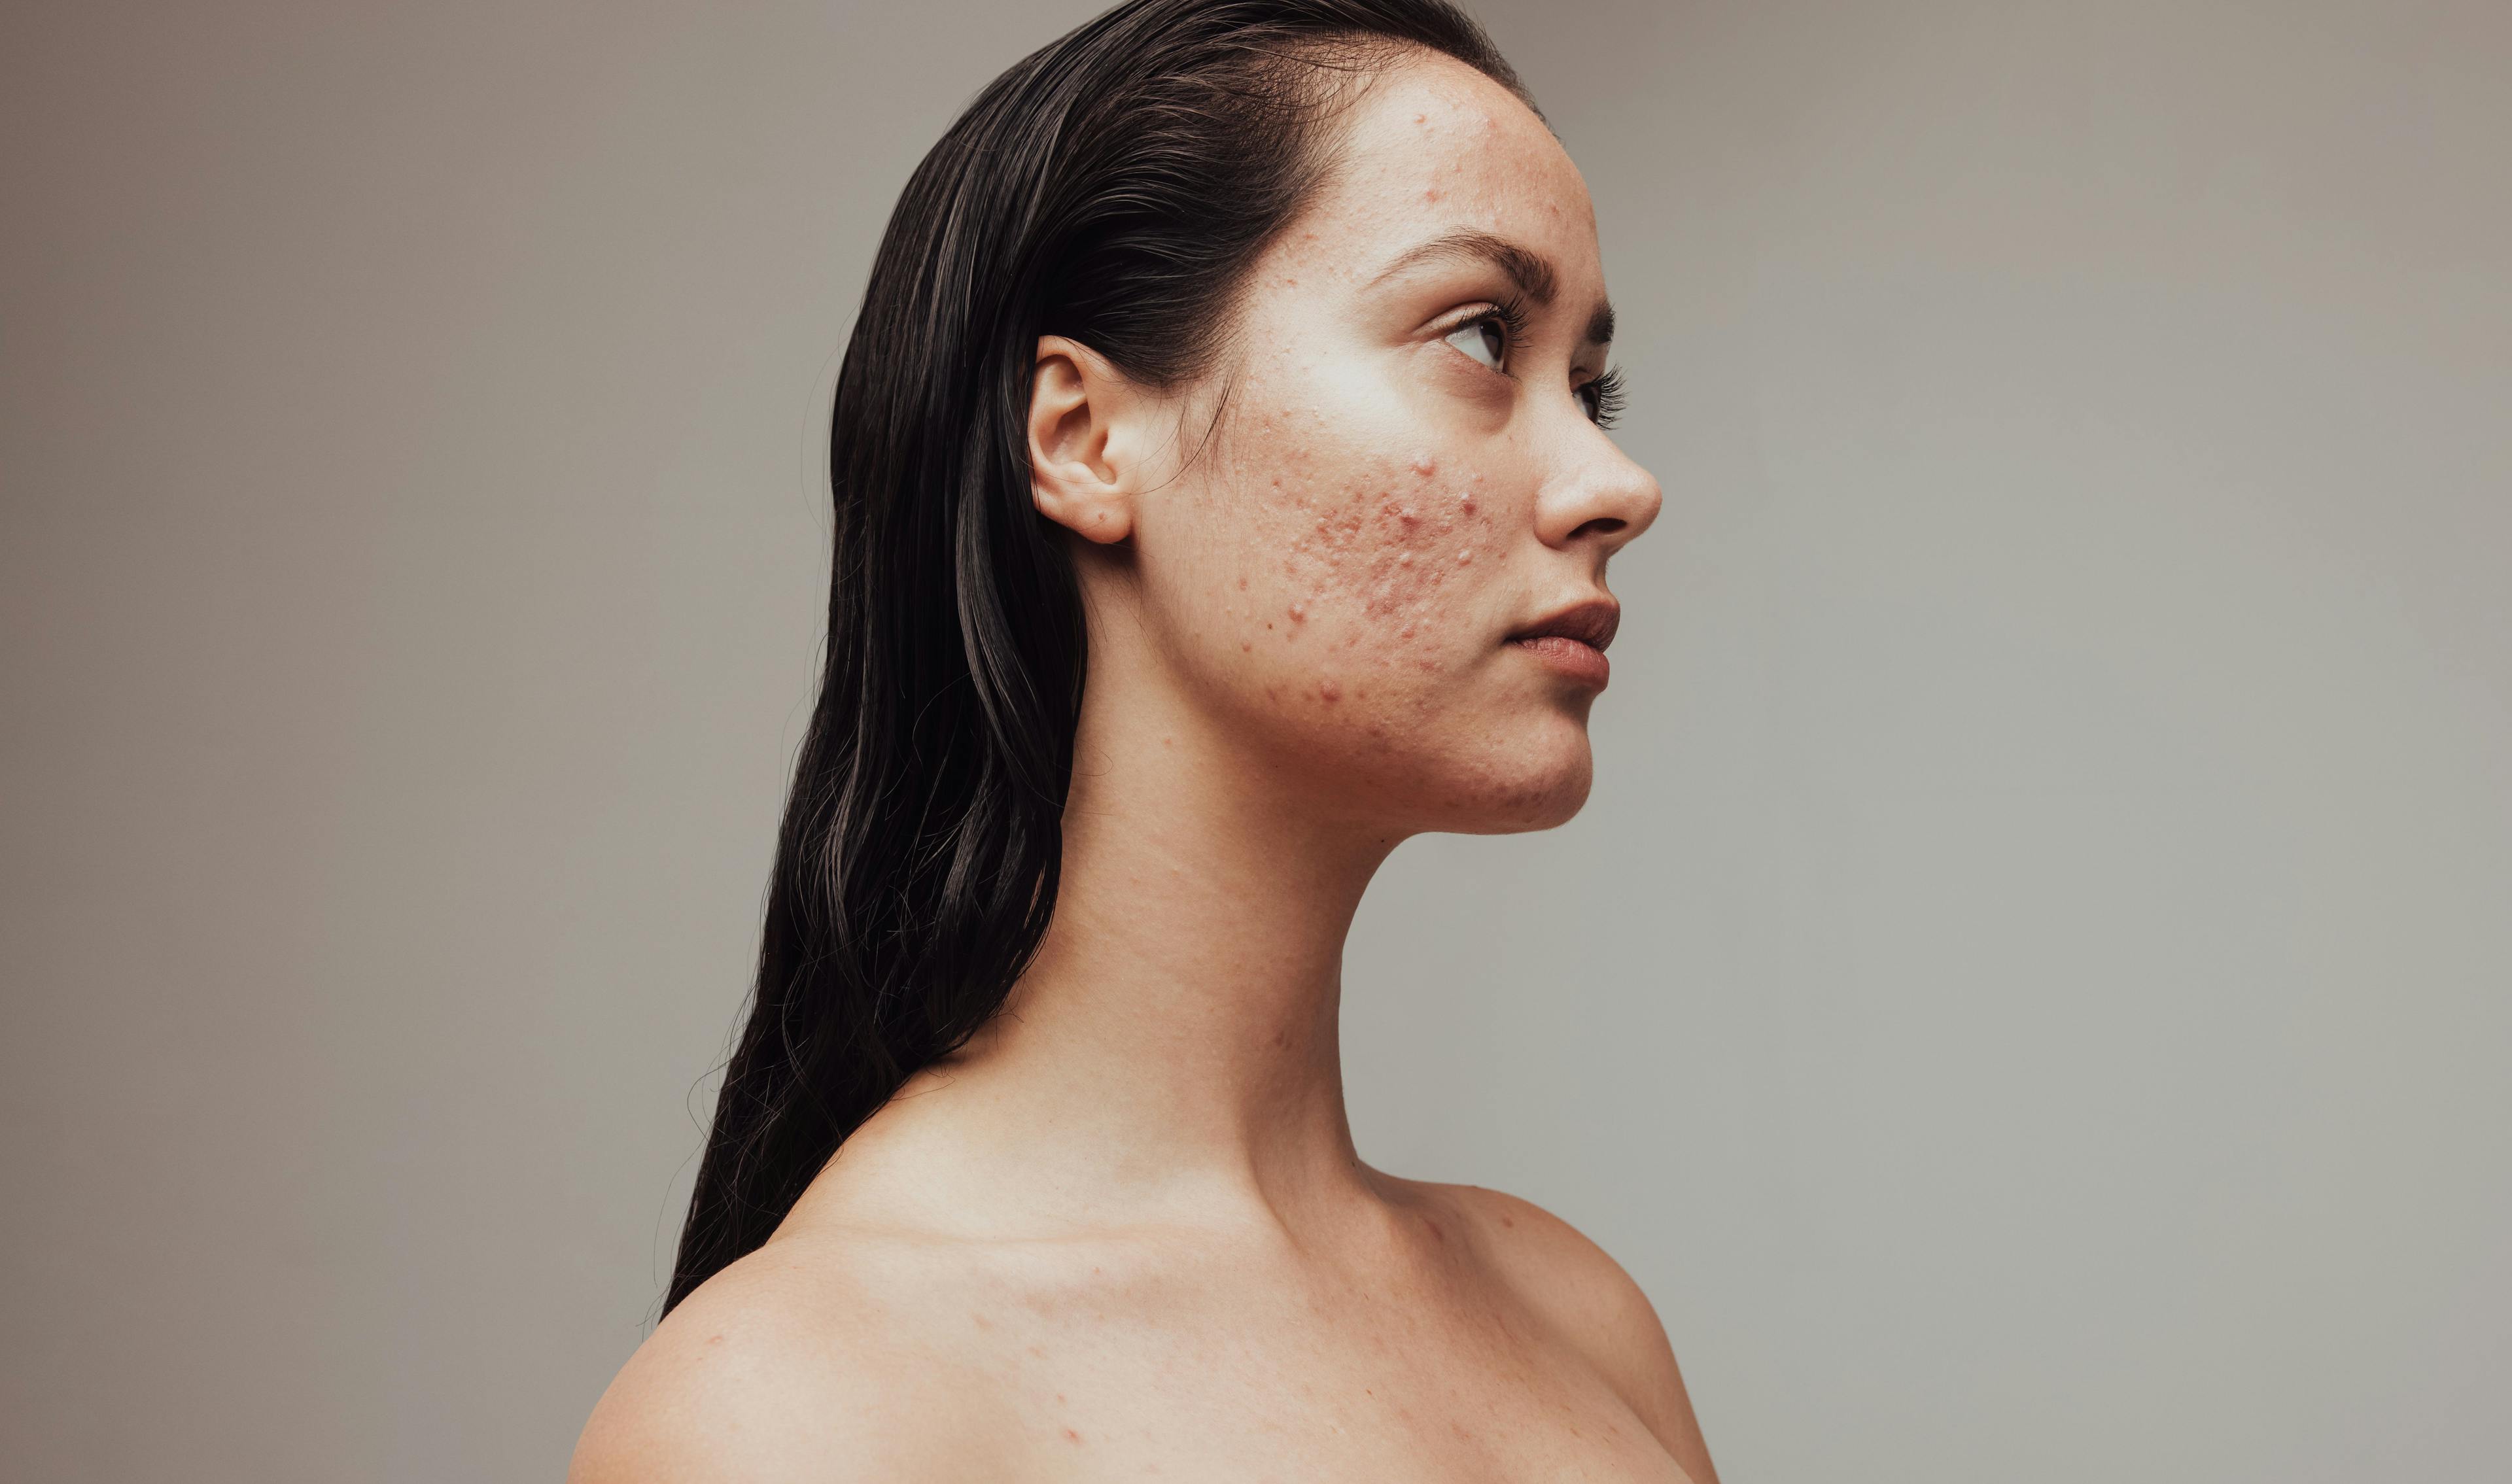 Research Finds Dermatology Visits for Acne Higher in Adult Female Patients